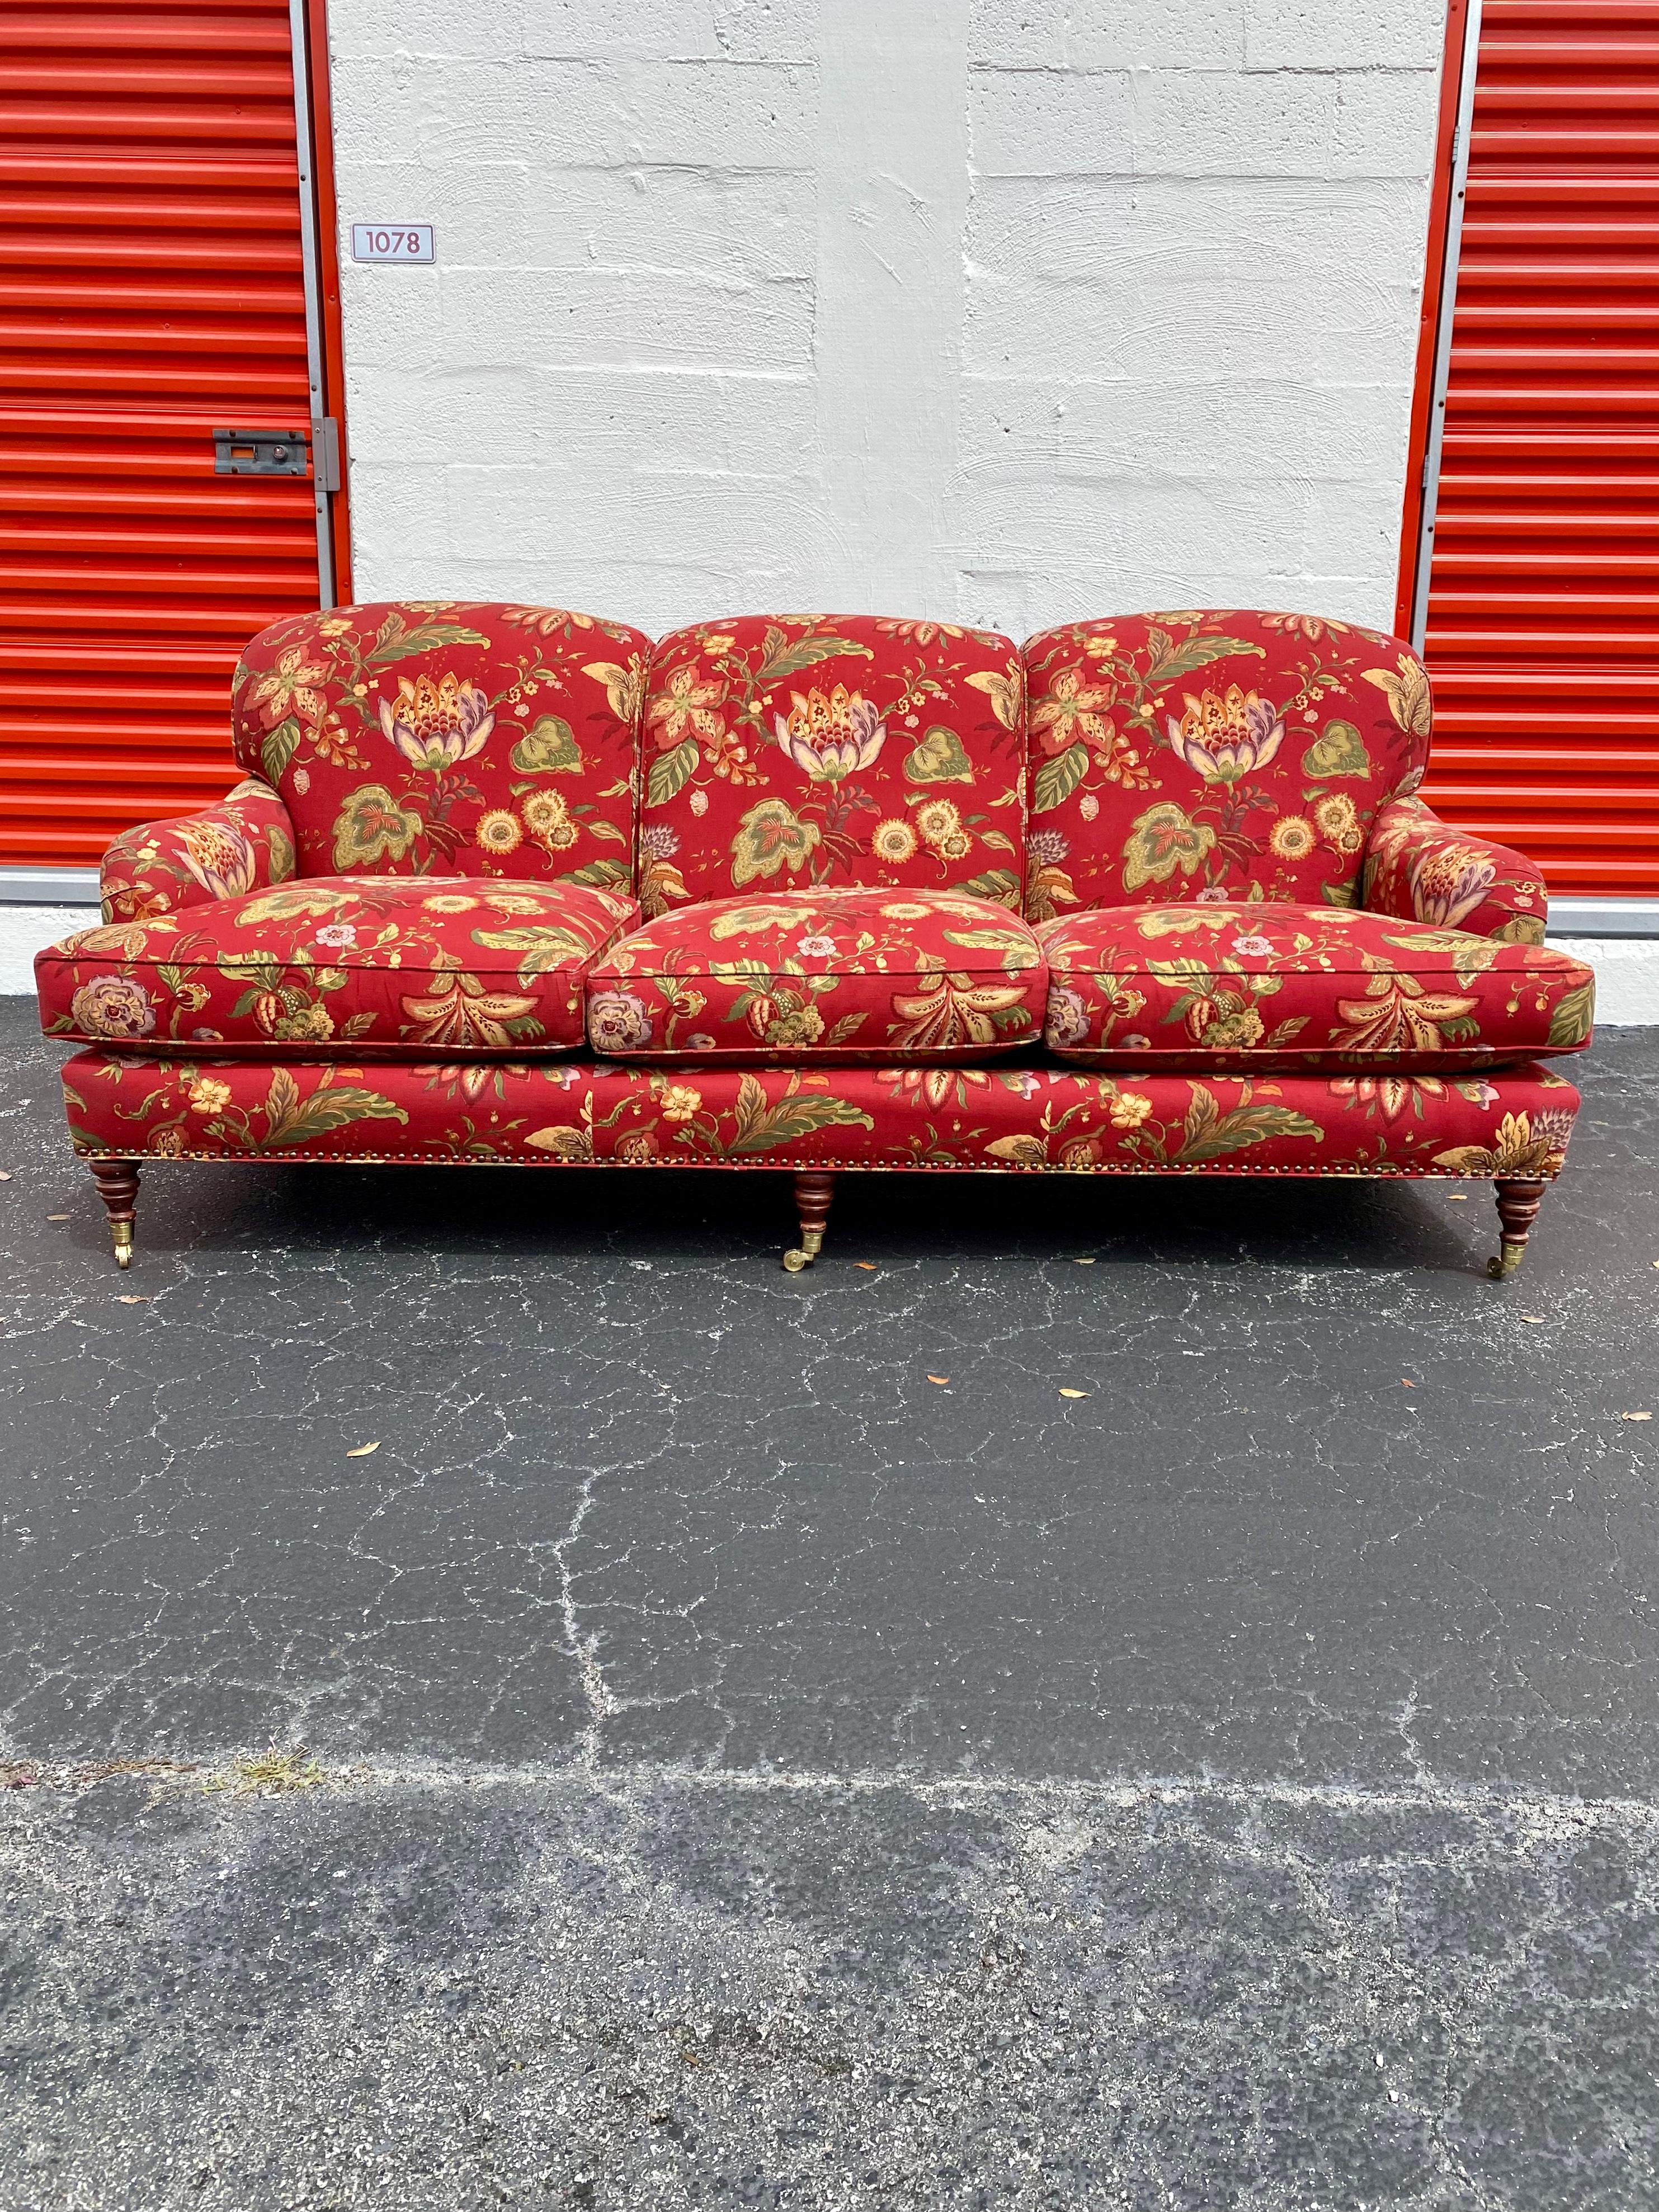 On offer on this occasion is one of the most stunning and rare, floral linen sofa you could hope to find. Outstanding design is exhibited throughout. The beautiful sofa is statement piece which is also extremely comfortable and packed with